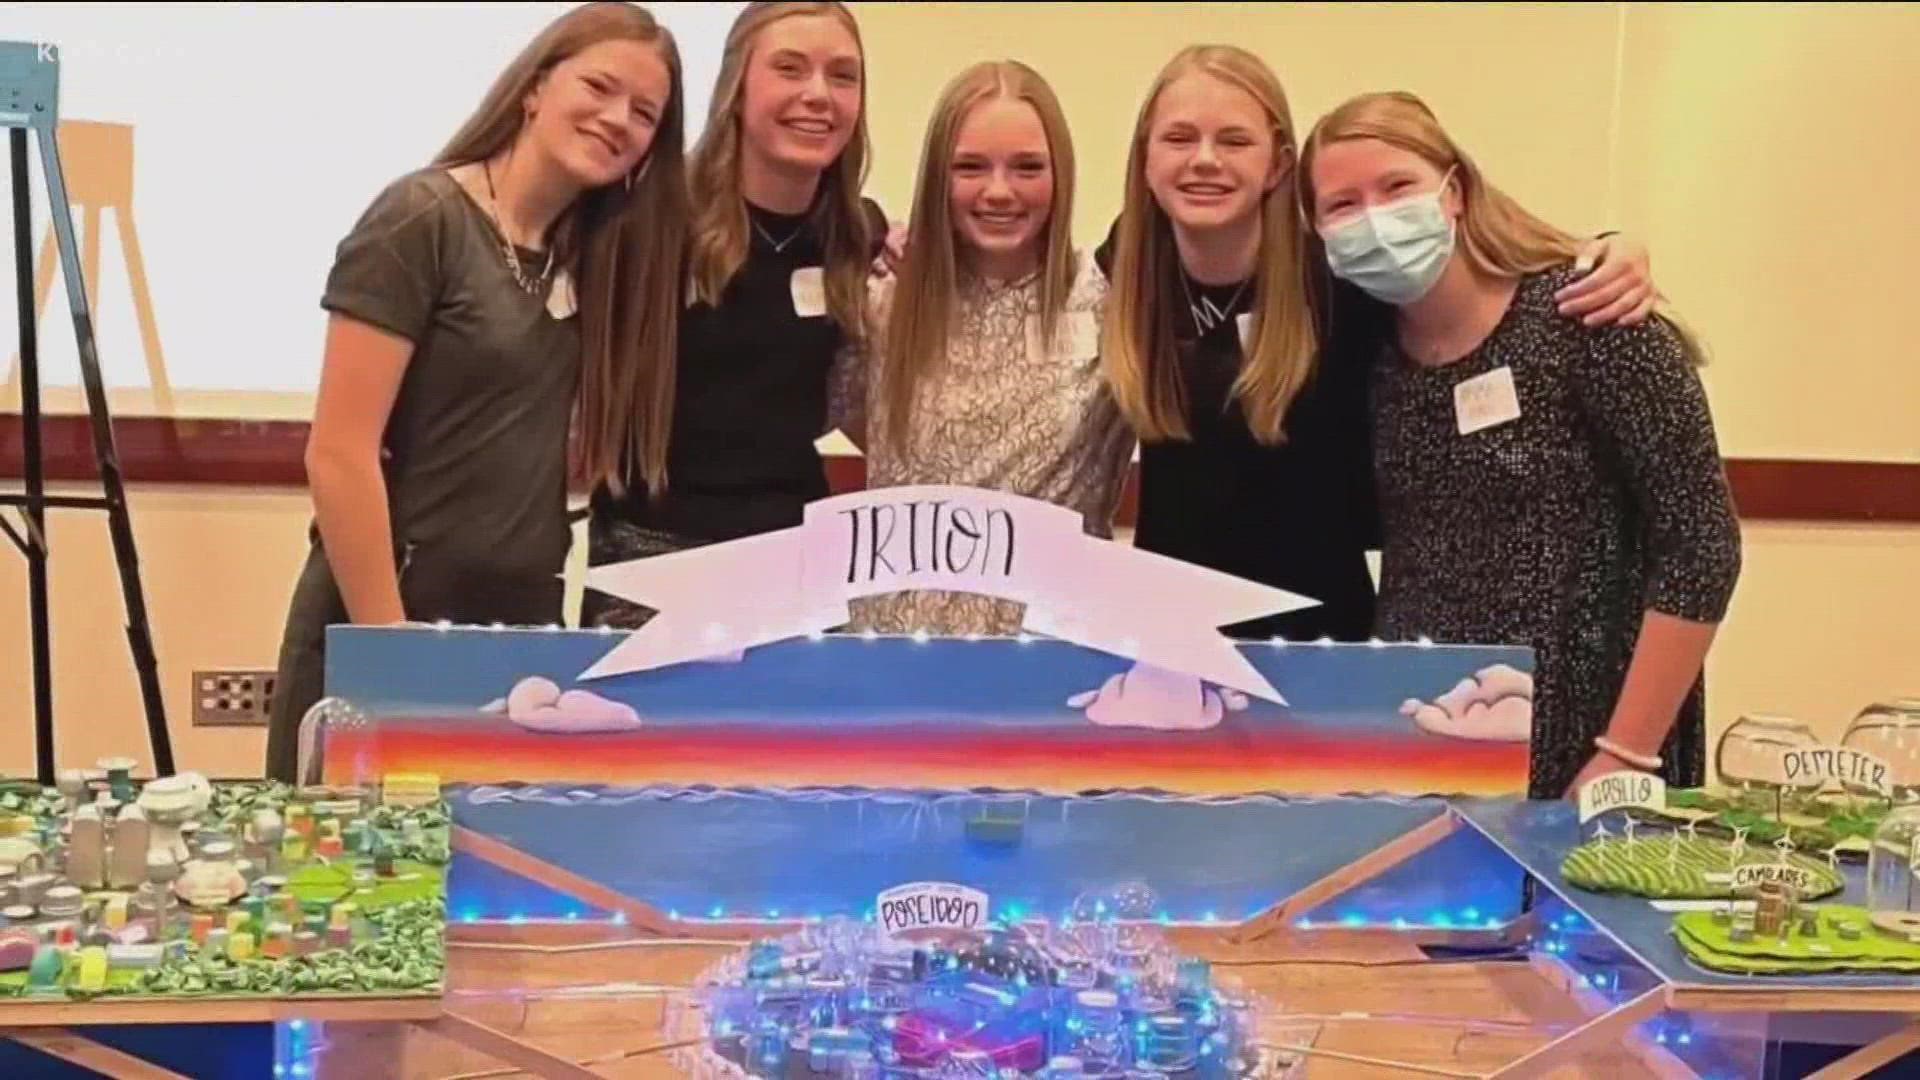 The team of five Heritage 8th graders won the Idaho Regional Future City Competition in February. Two Hubble Homes employees mentored the team during competitions.